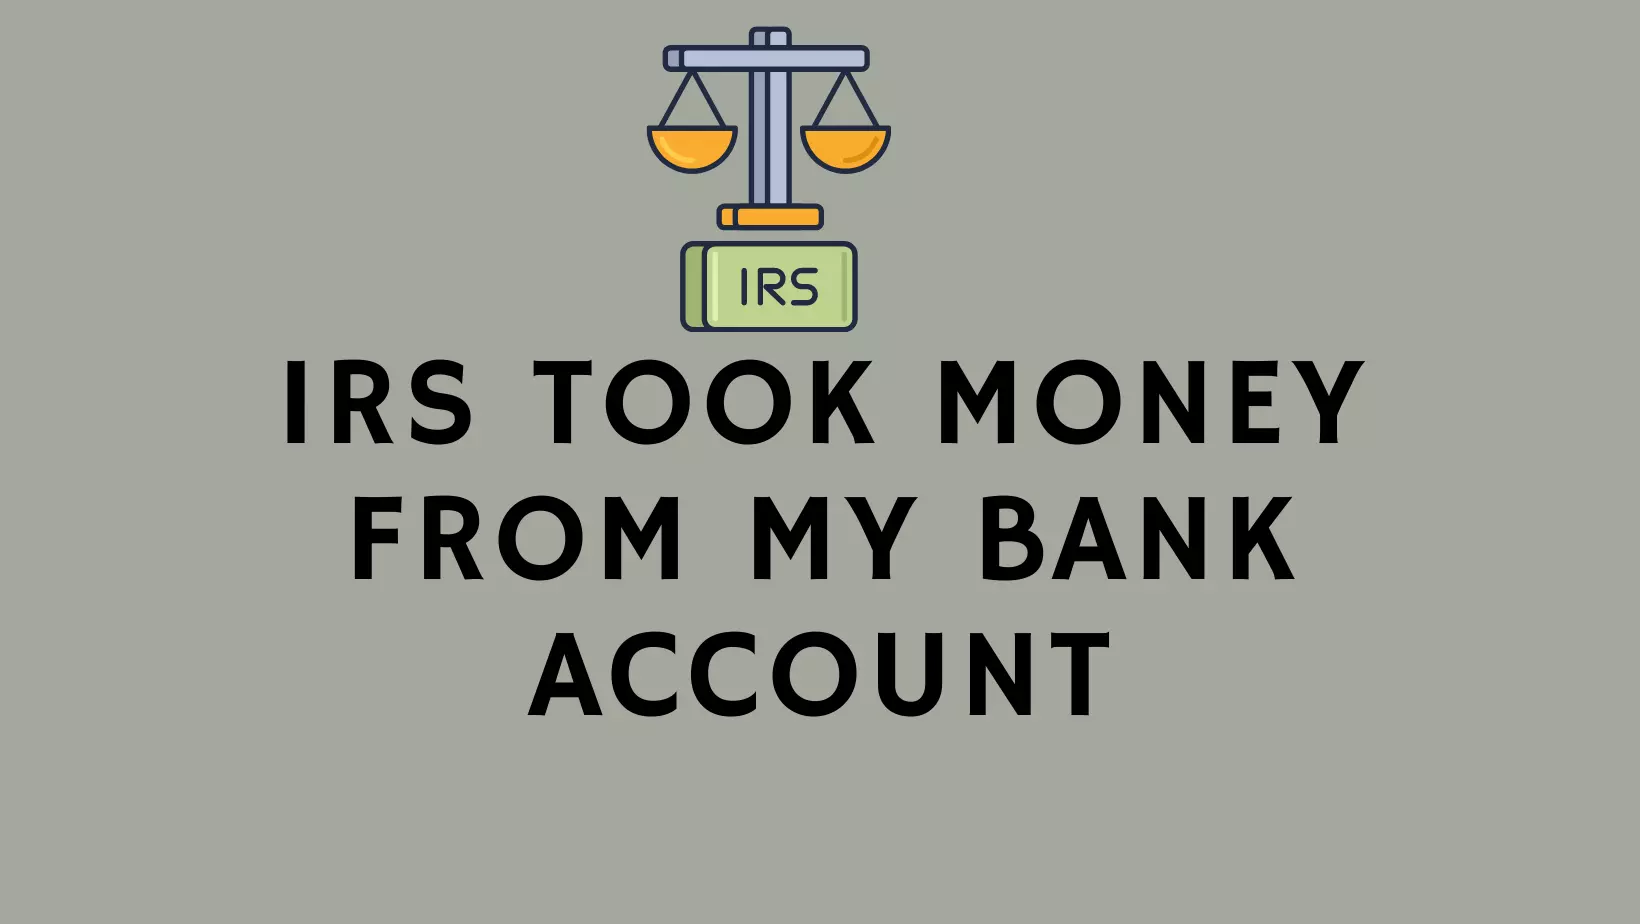 IRS took money from my bank account